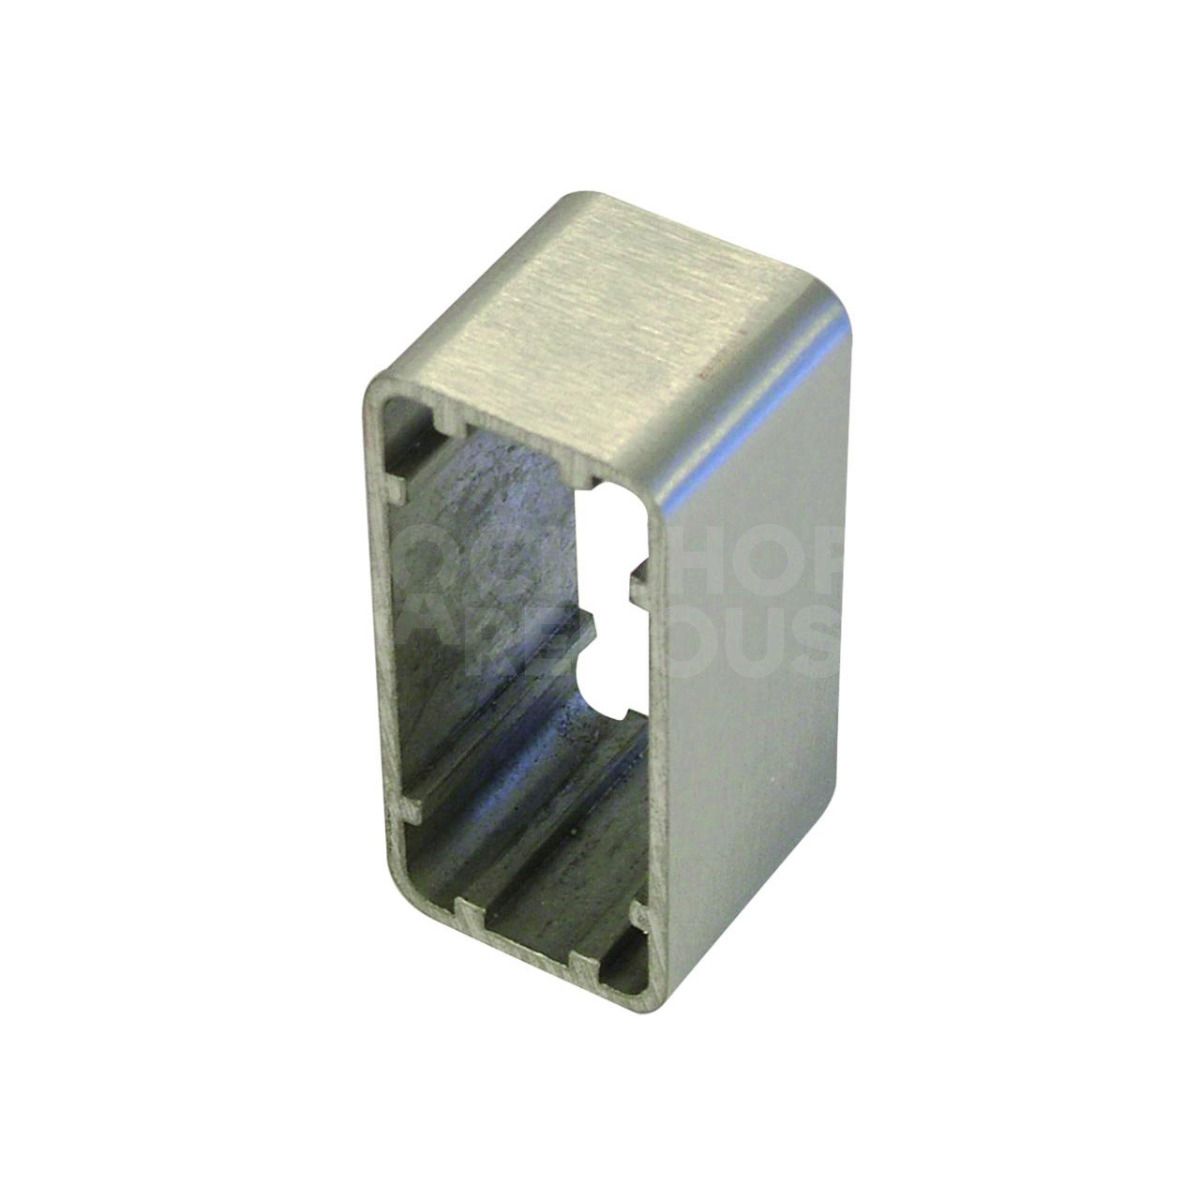 ASEC Narrow Surface Housing for Exit Buttons